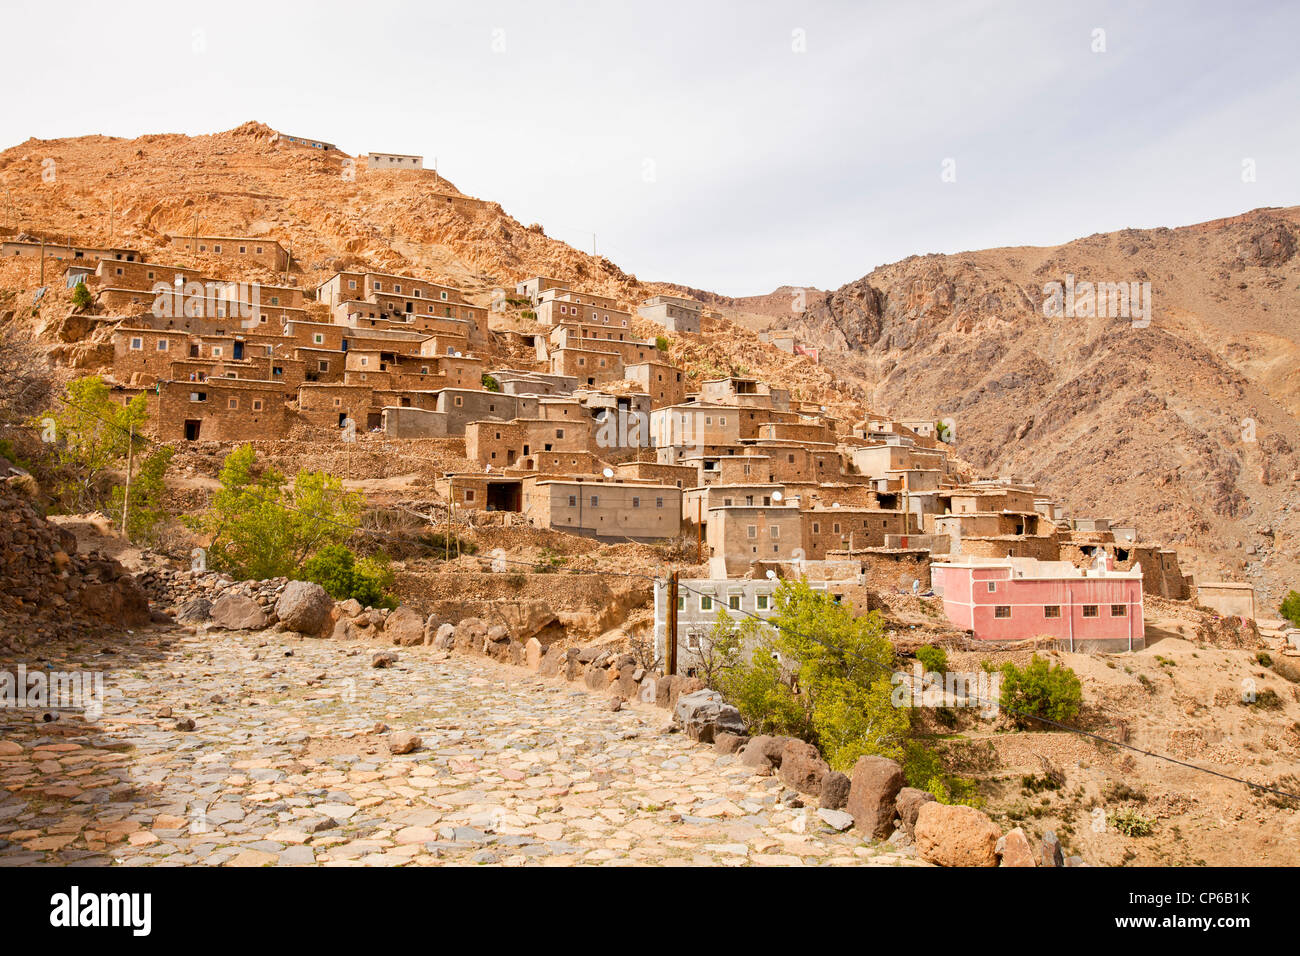 A Berber village in the Anti Atlas mountains of Morocco. Stock Photo